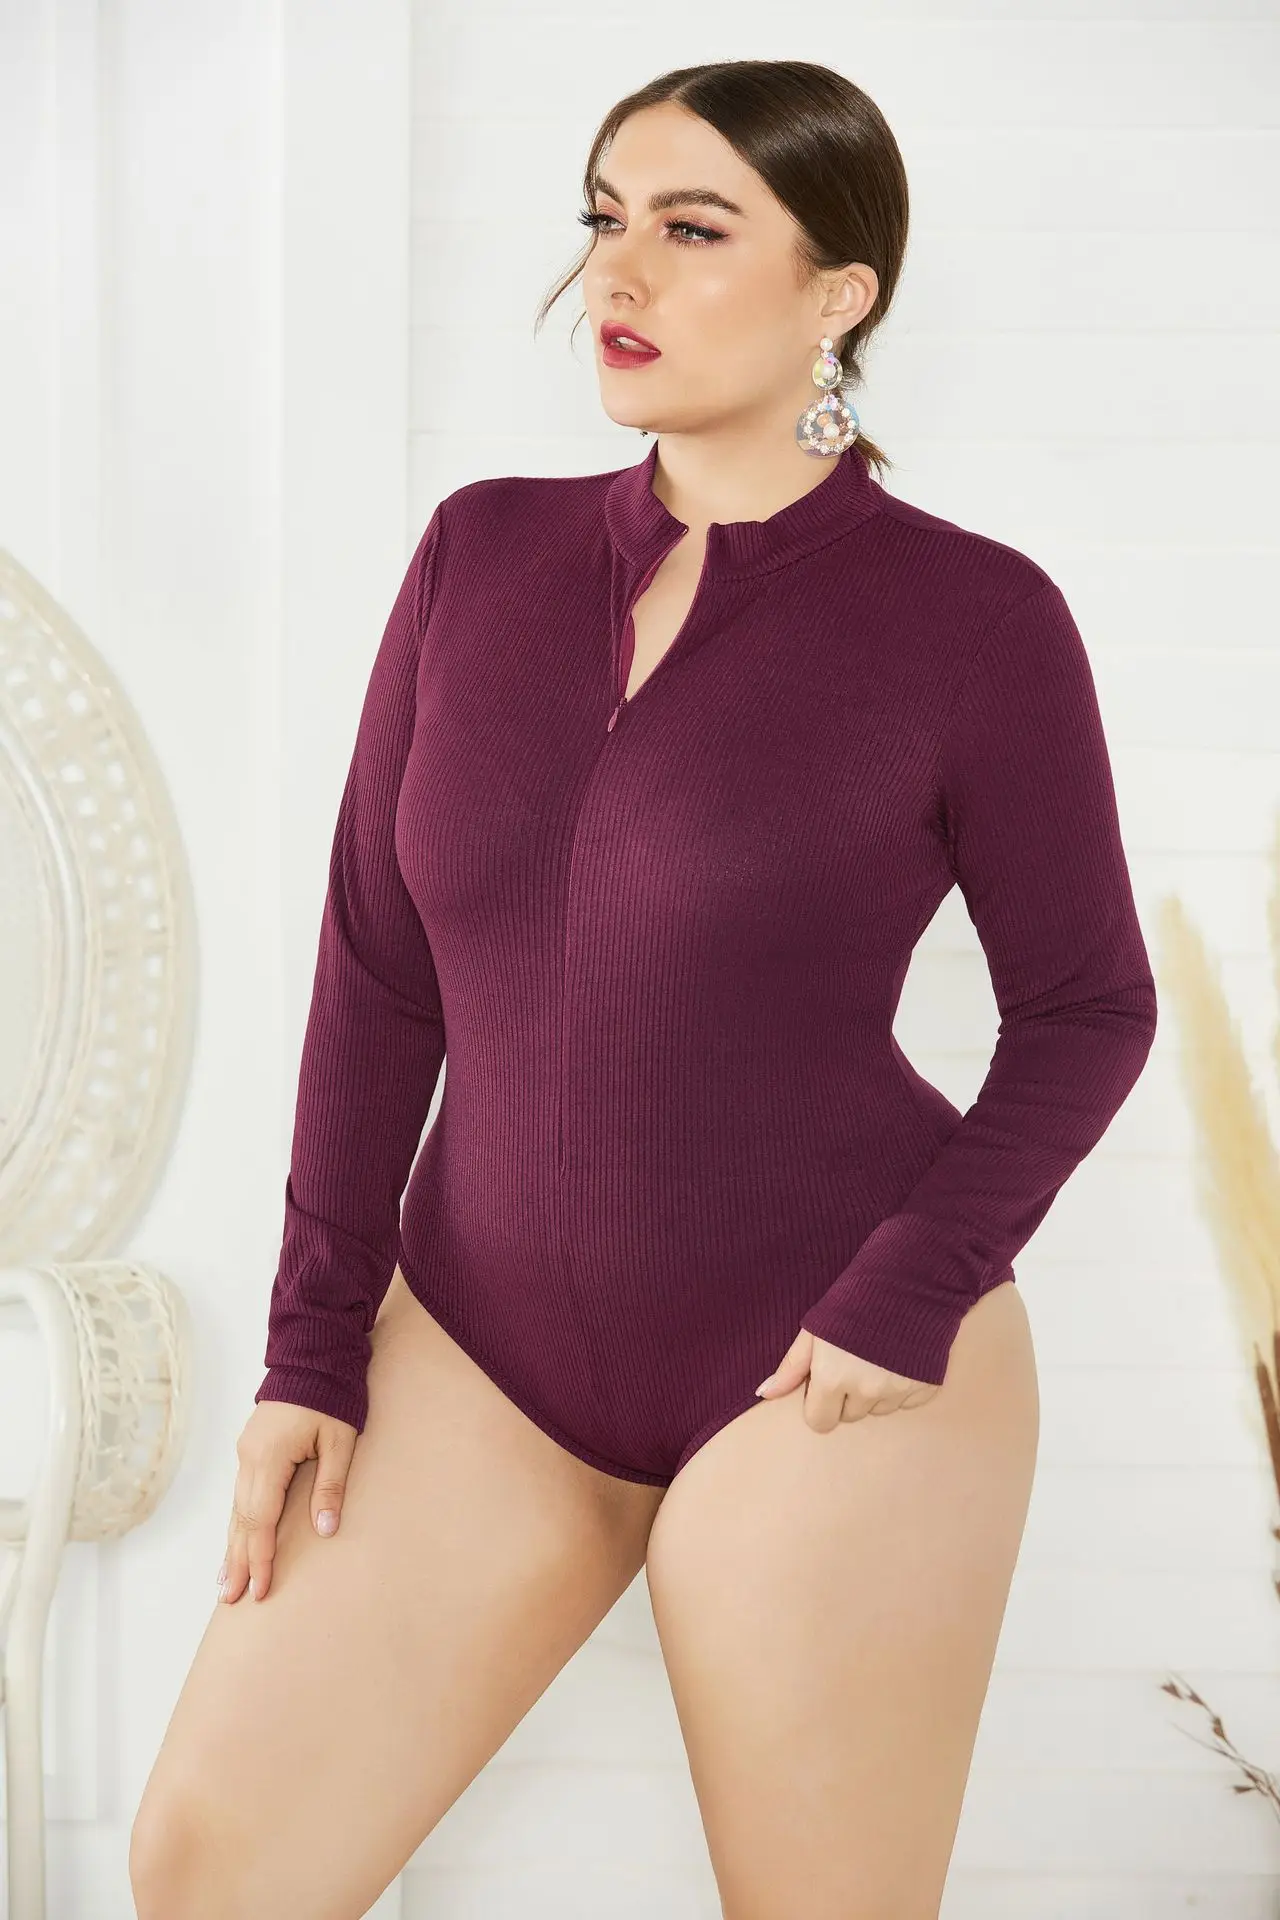 sequin bodysuit Plus Size Women 5XL Stand Collar Long Sleeve Zipper Knitted Sweater Bodysuits 2019 Autumn Winter New Solid Casual Office Rompers lace bodysuit